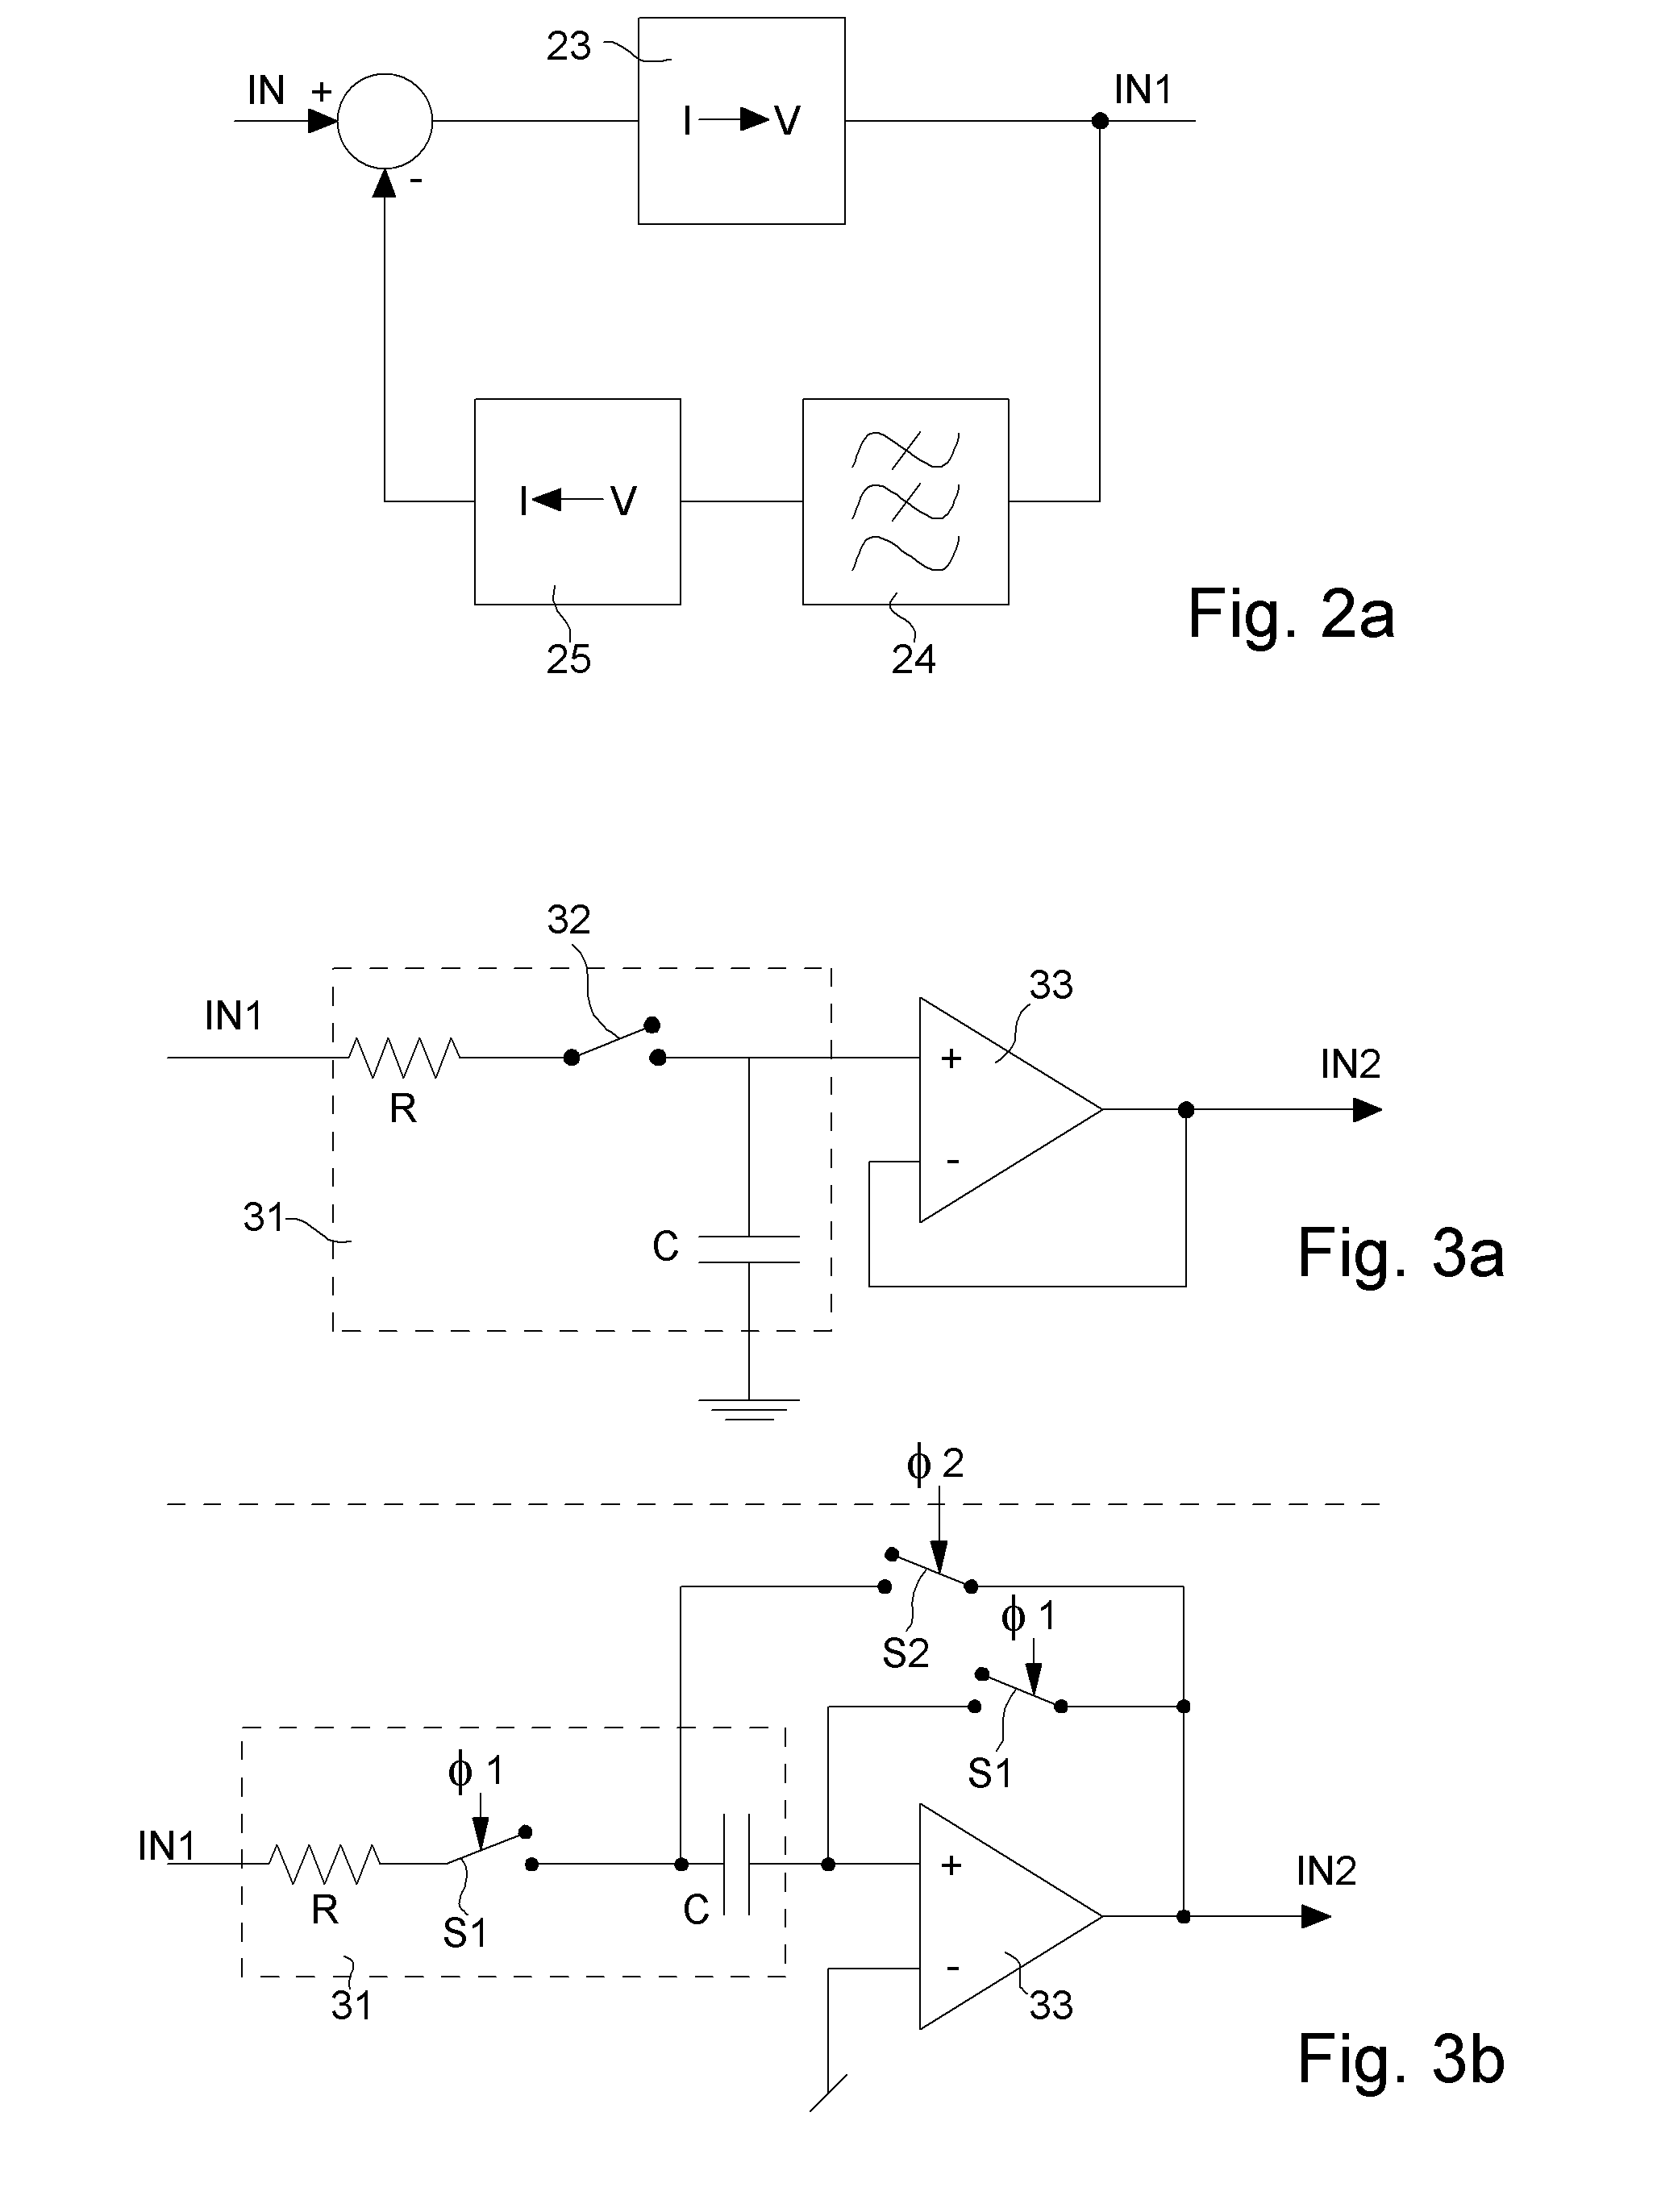 Signal conditioning circuit between an optical device and a processing unit